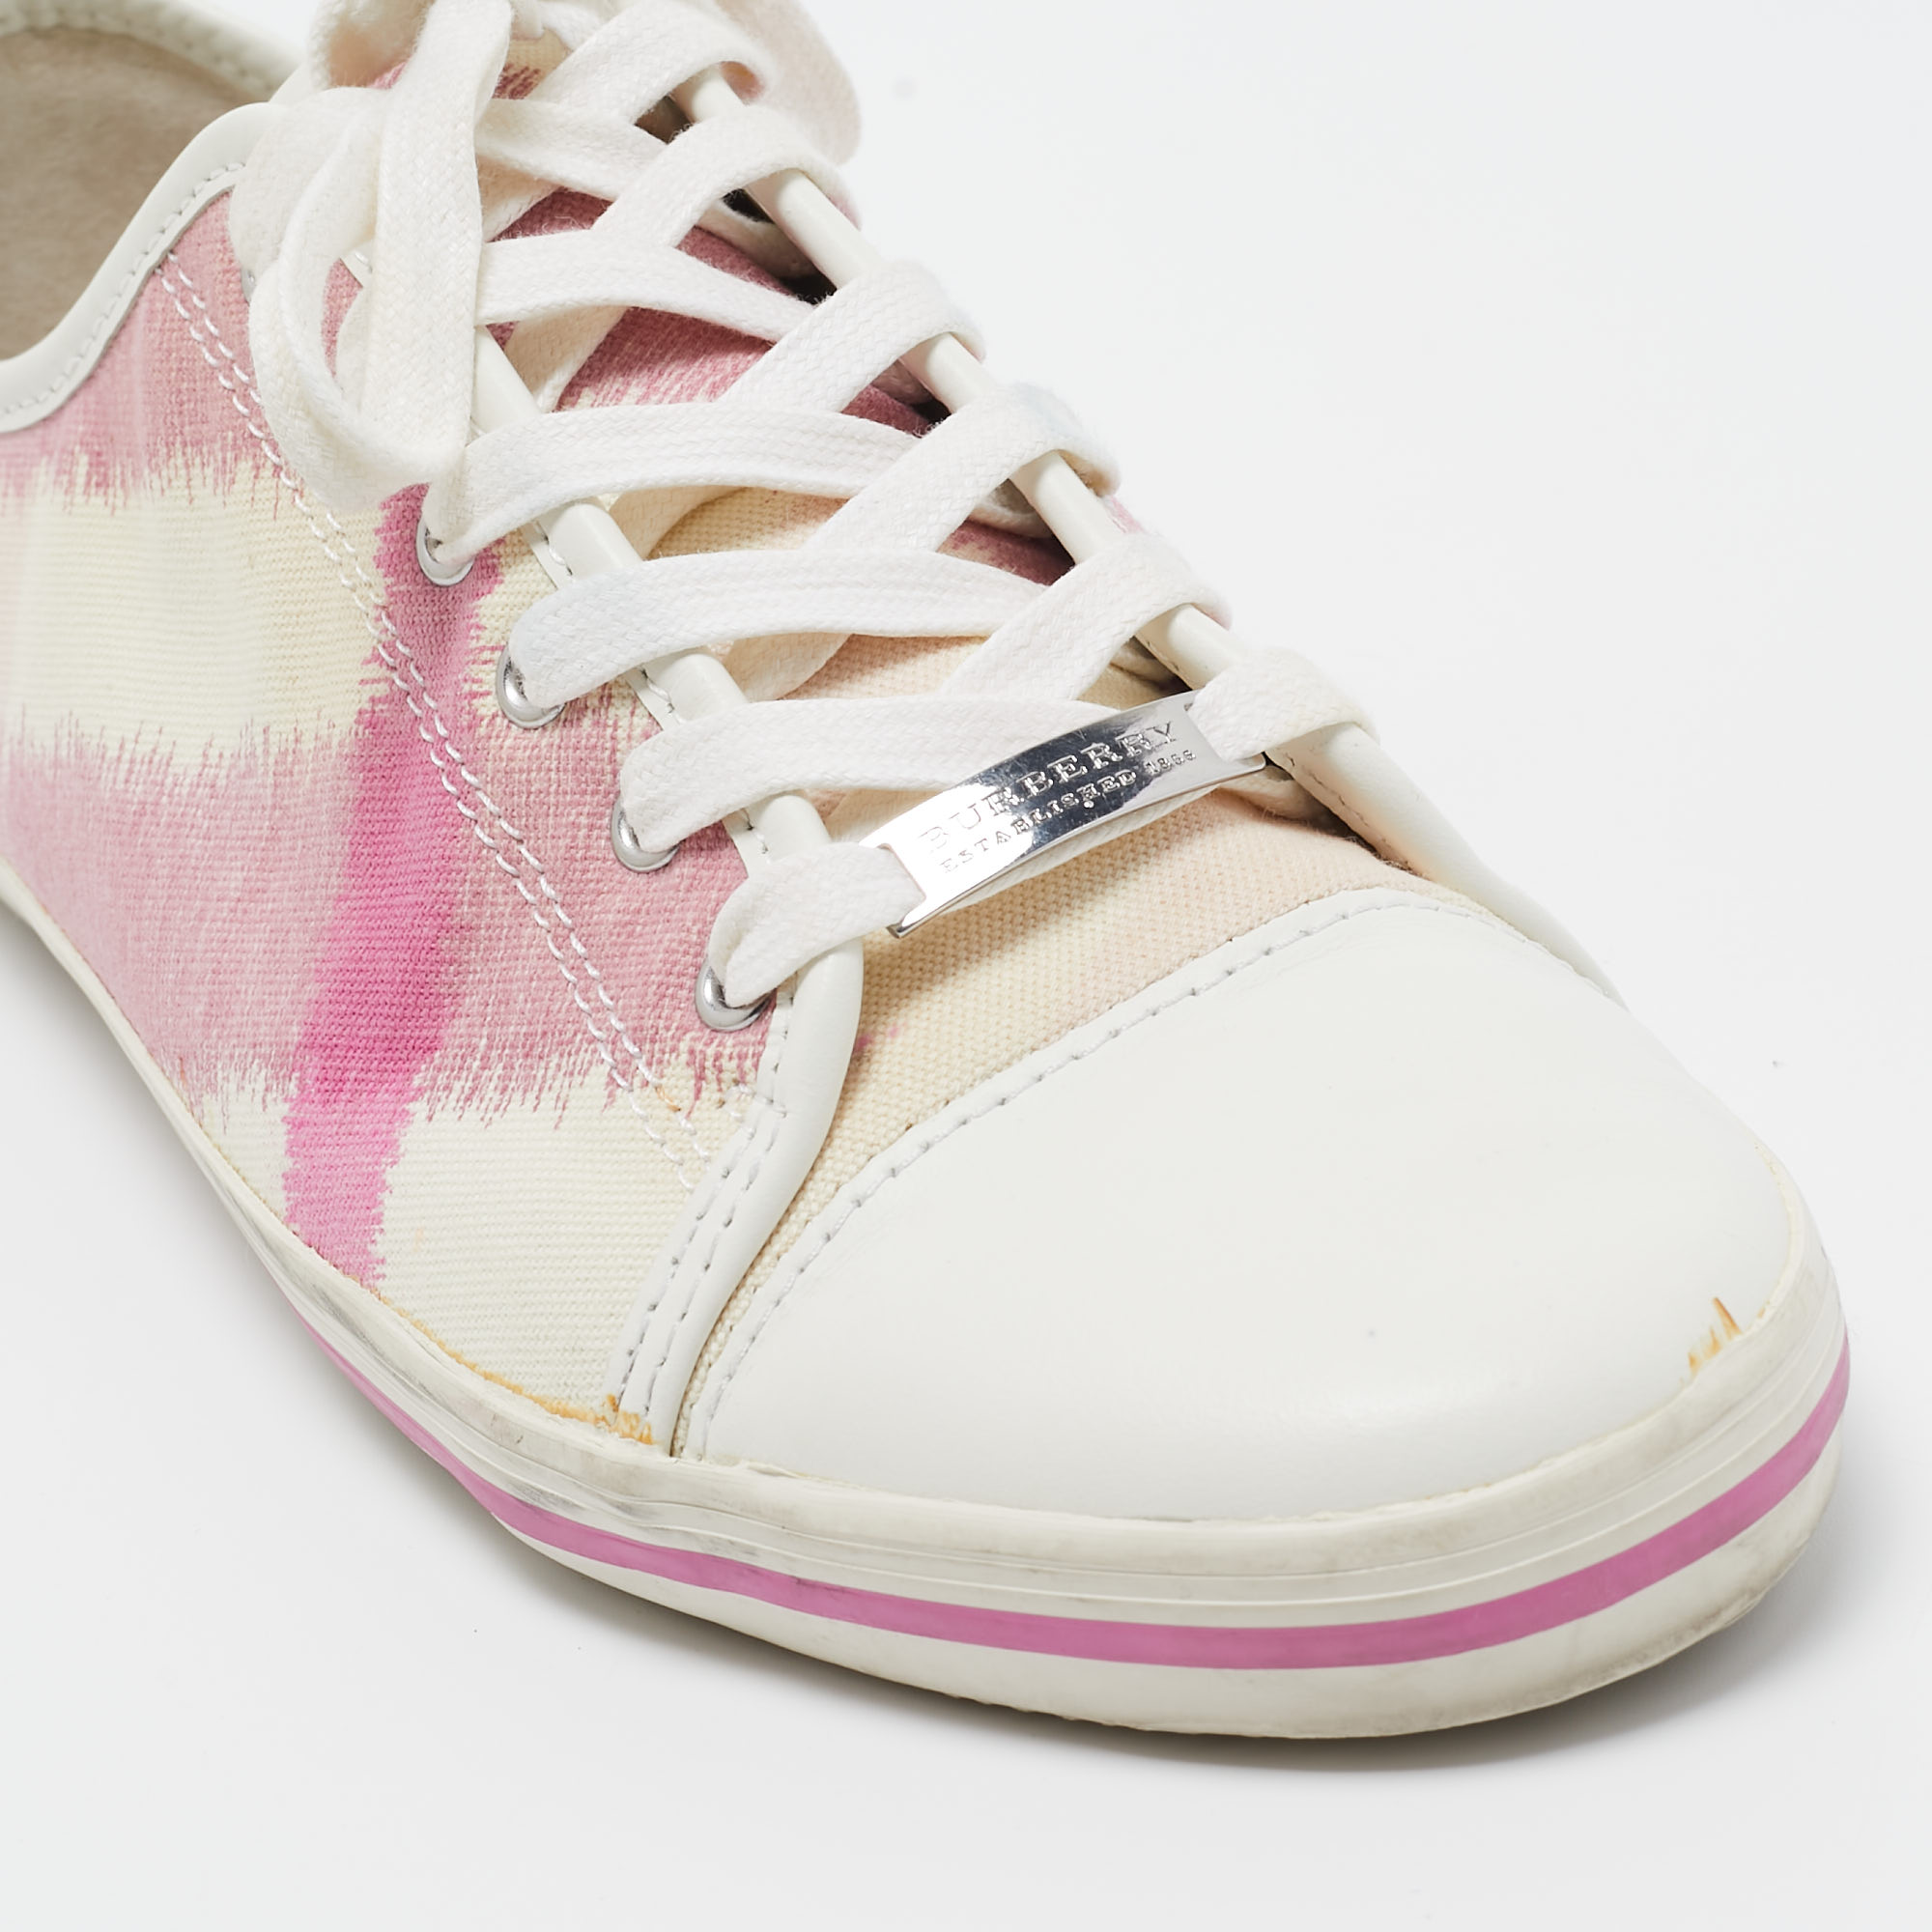 Burberry Pink/White Leather And Canvas Cap Toe Low Top Sneakers Size 41